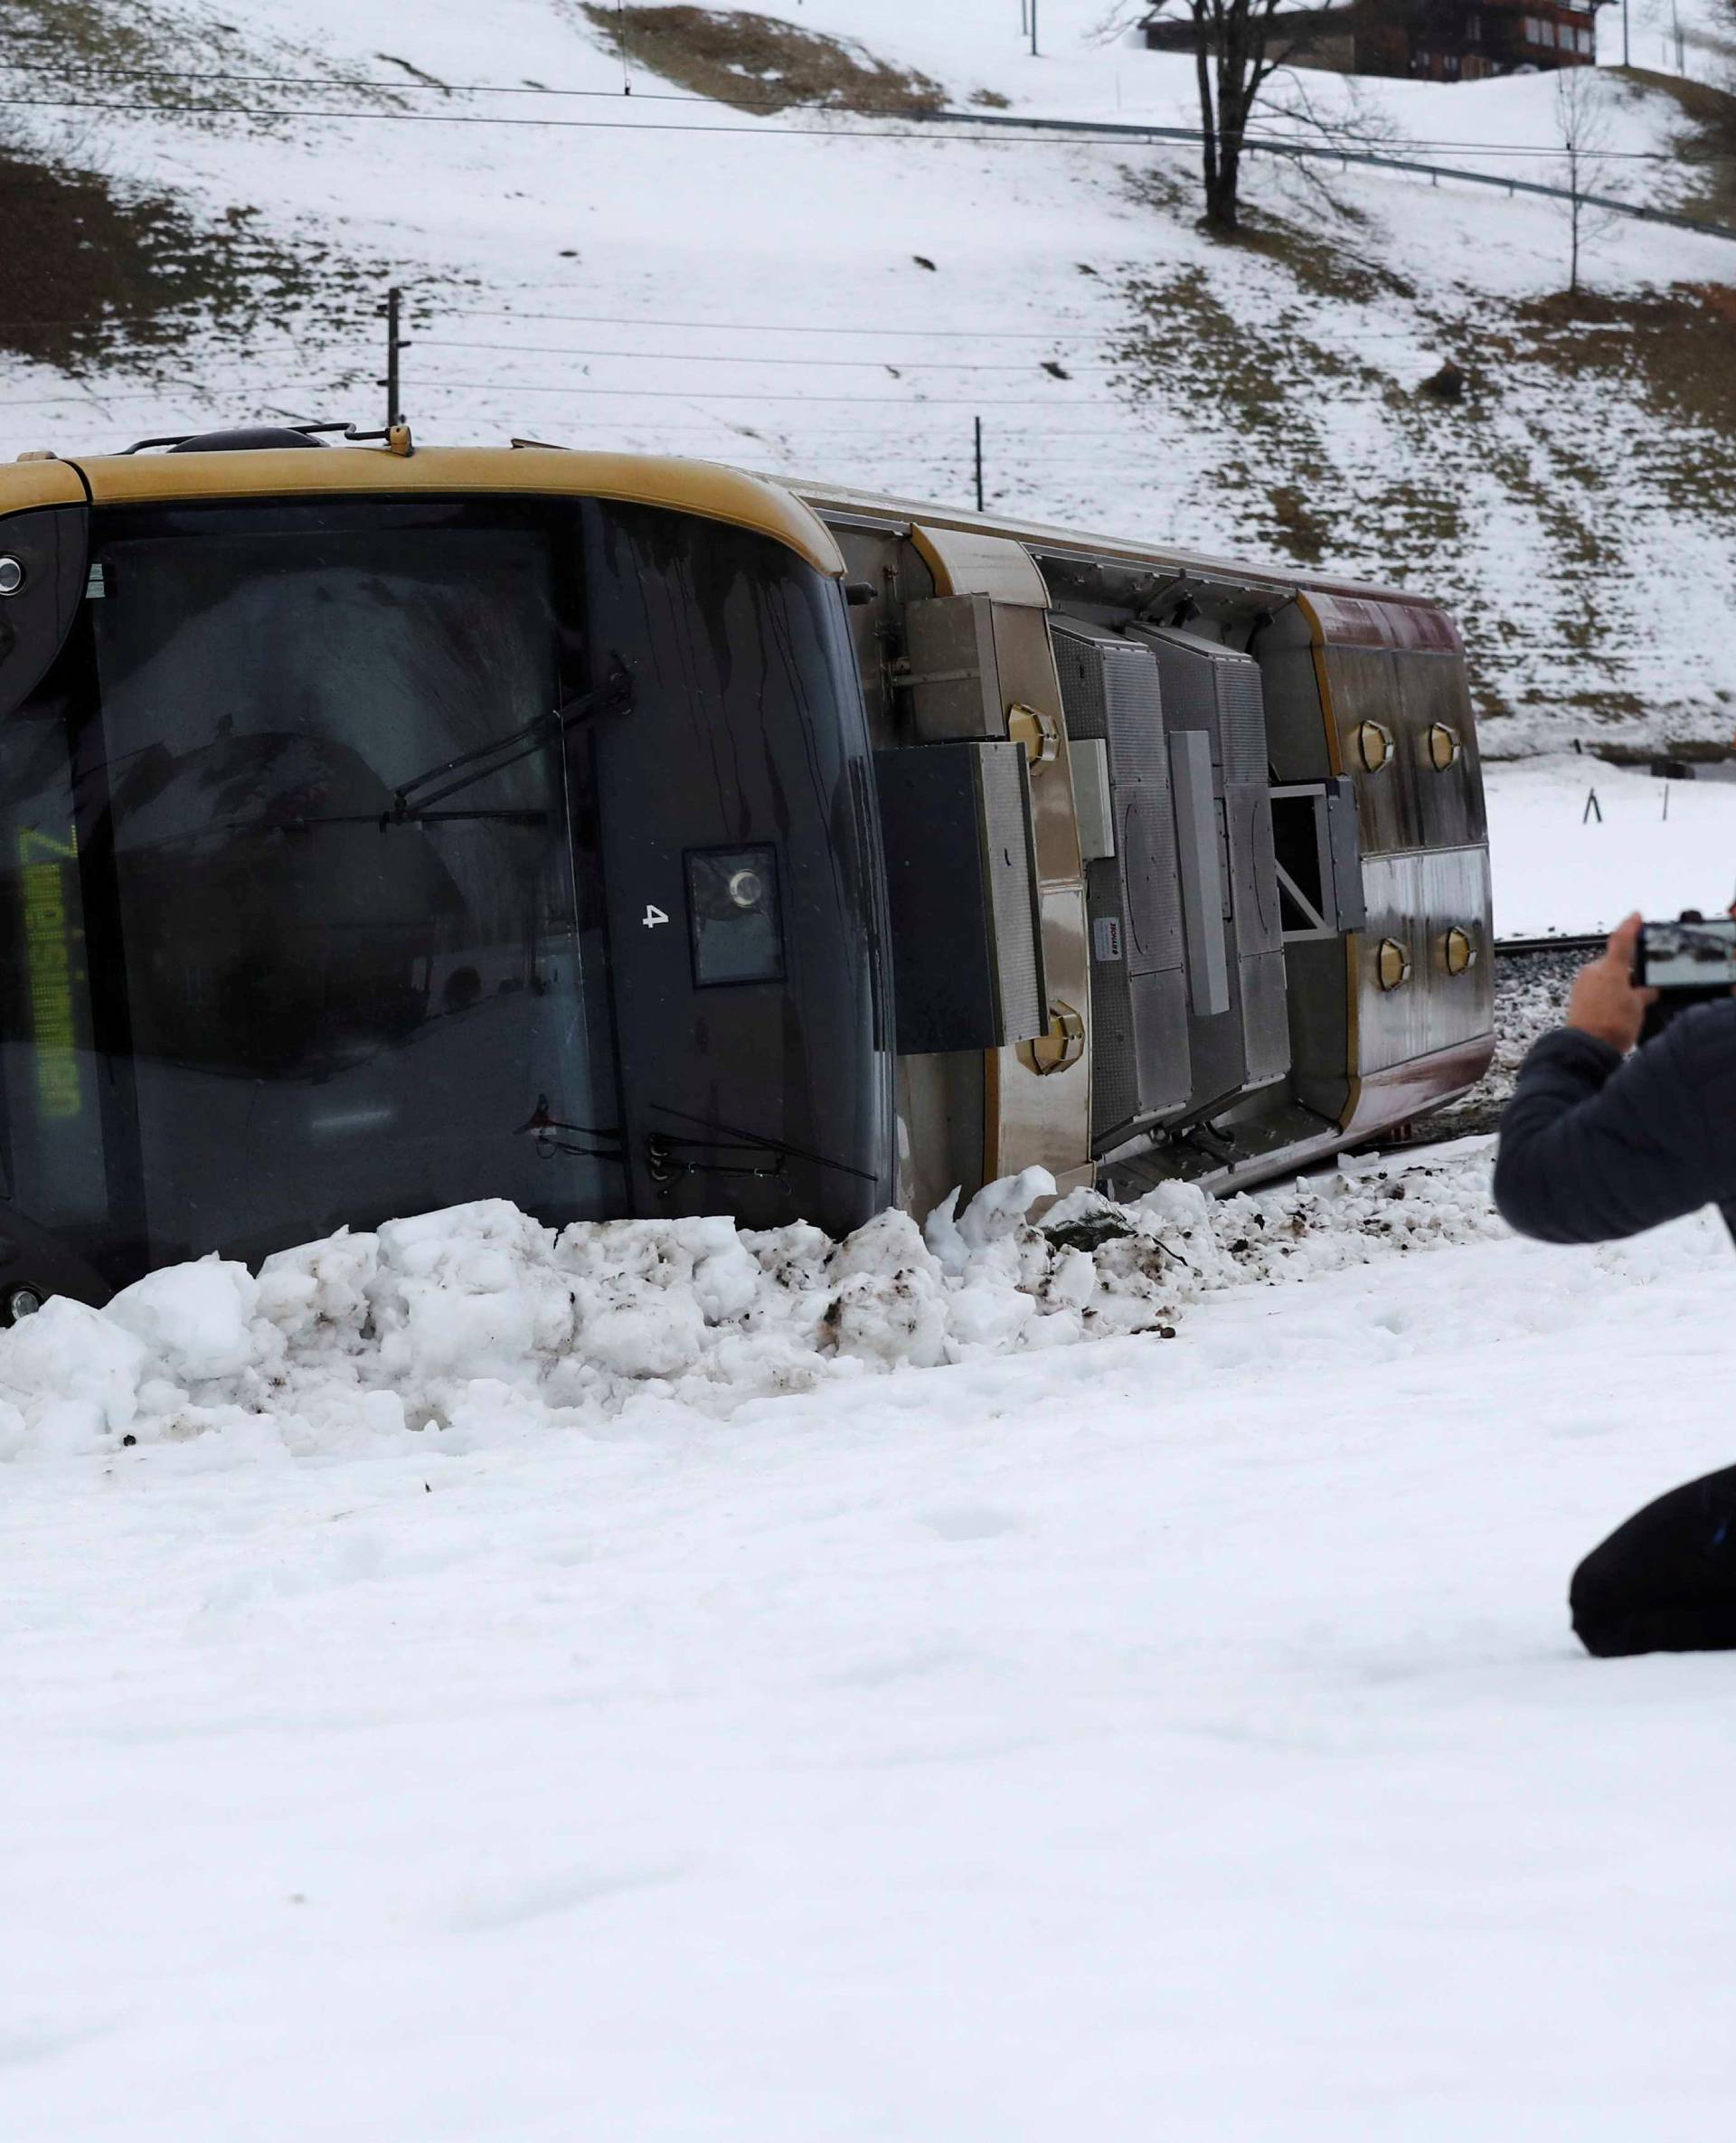 A man takes pictures of a carriage of the MOB train lying on its side after if was pushed out of the tracks by gusts of wind during storm Eleanor near Lenk